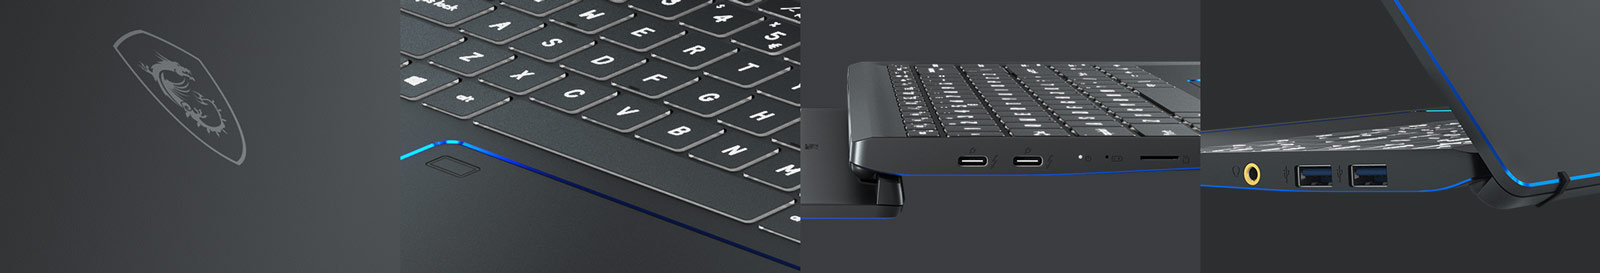 Four Different Views to Show MSI Prestige 15: Front Cover MSI Logo, Keyboard Detail, Side Looking with USB ports and The Other Side Ports